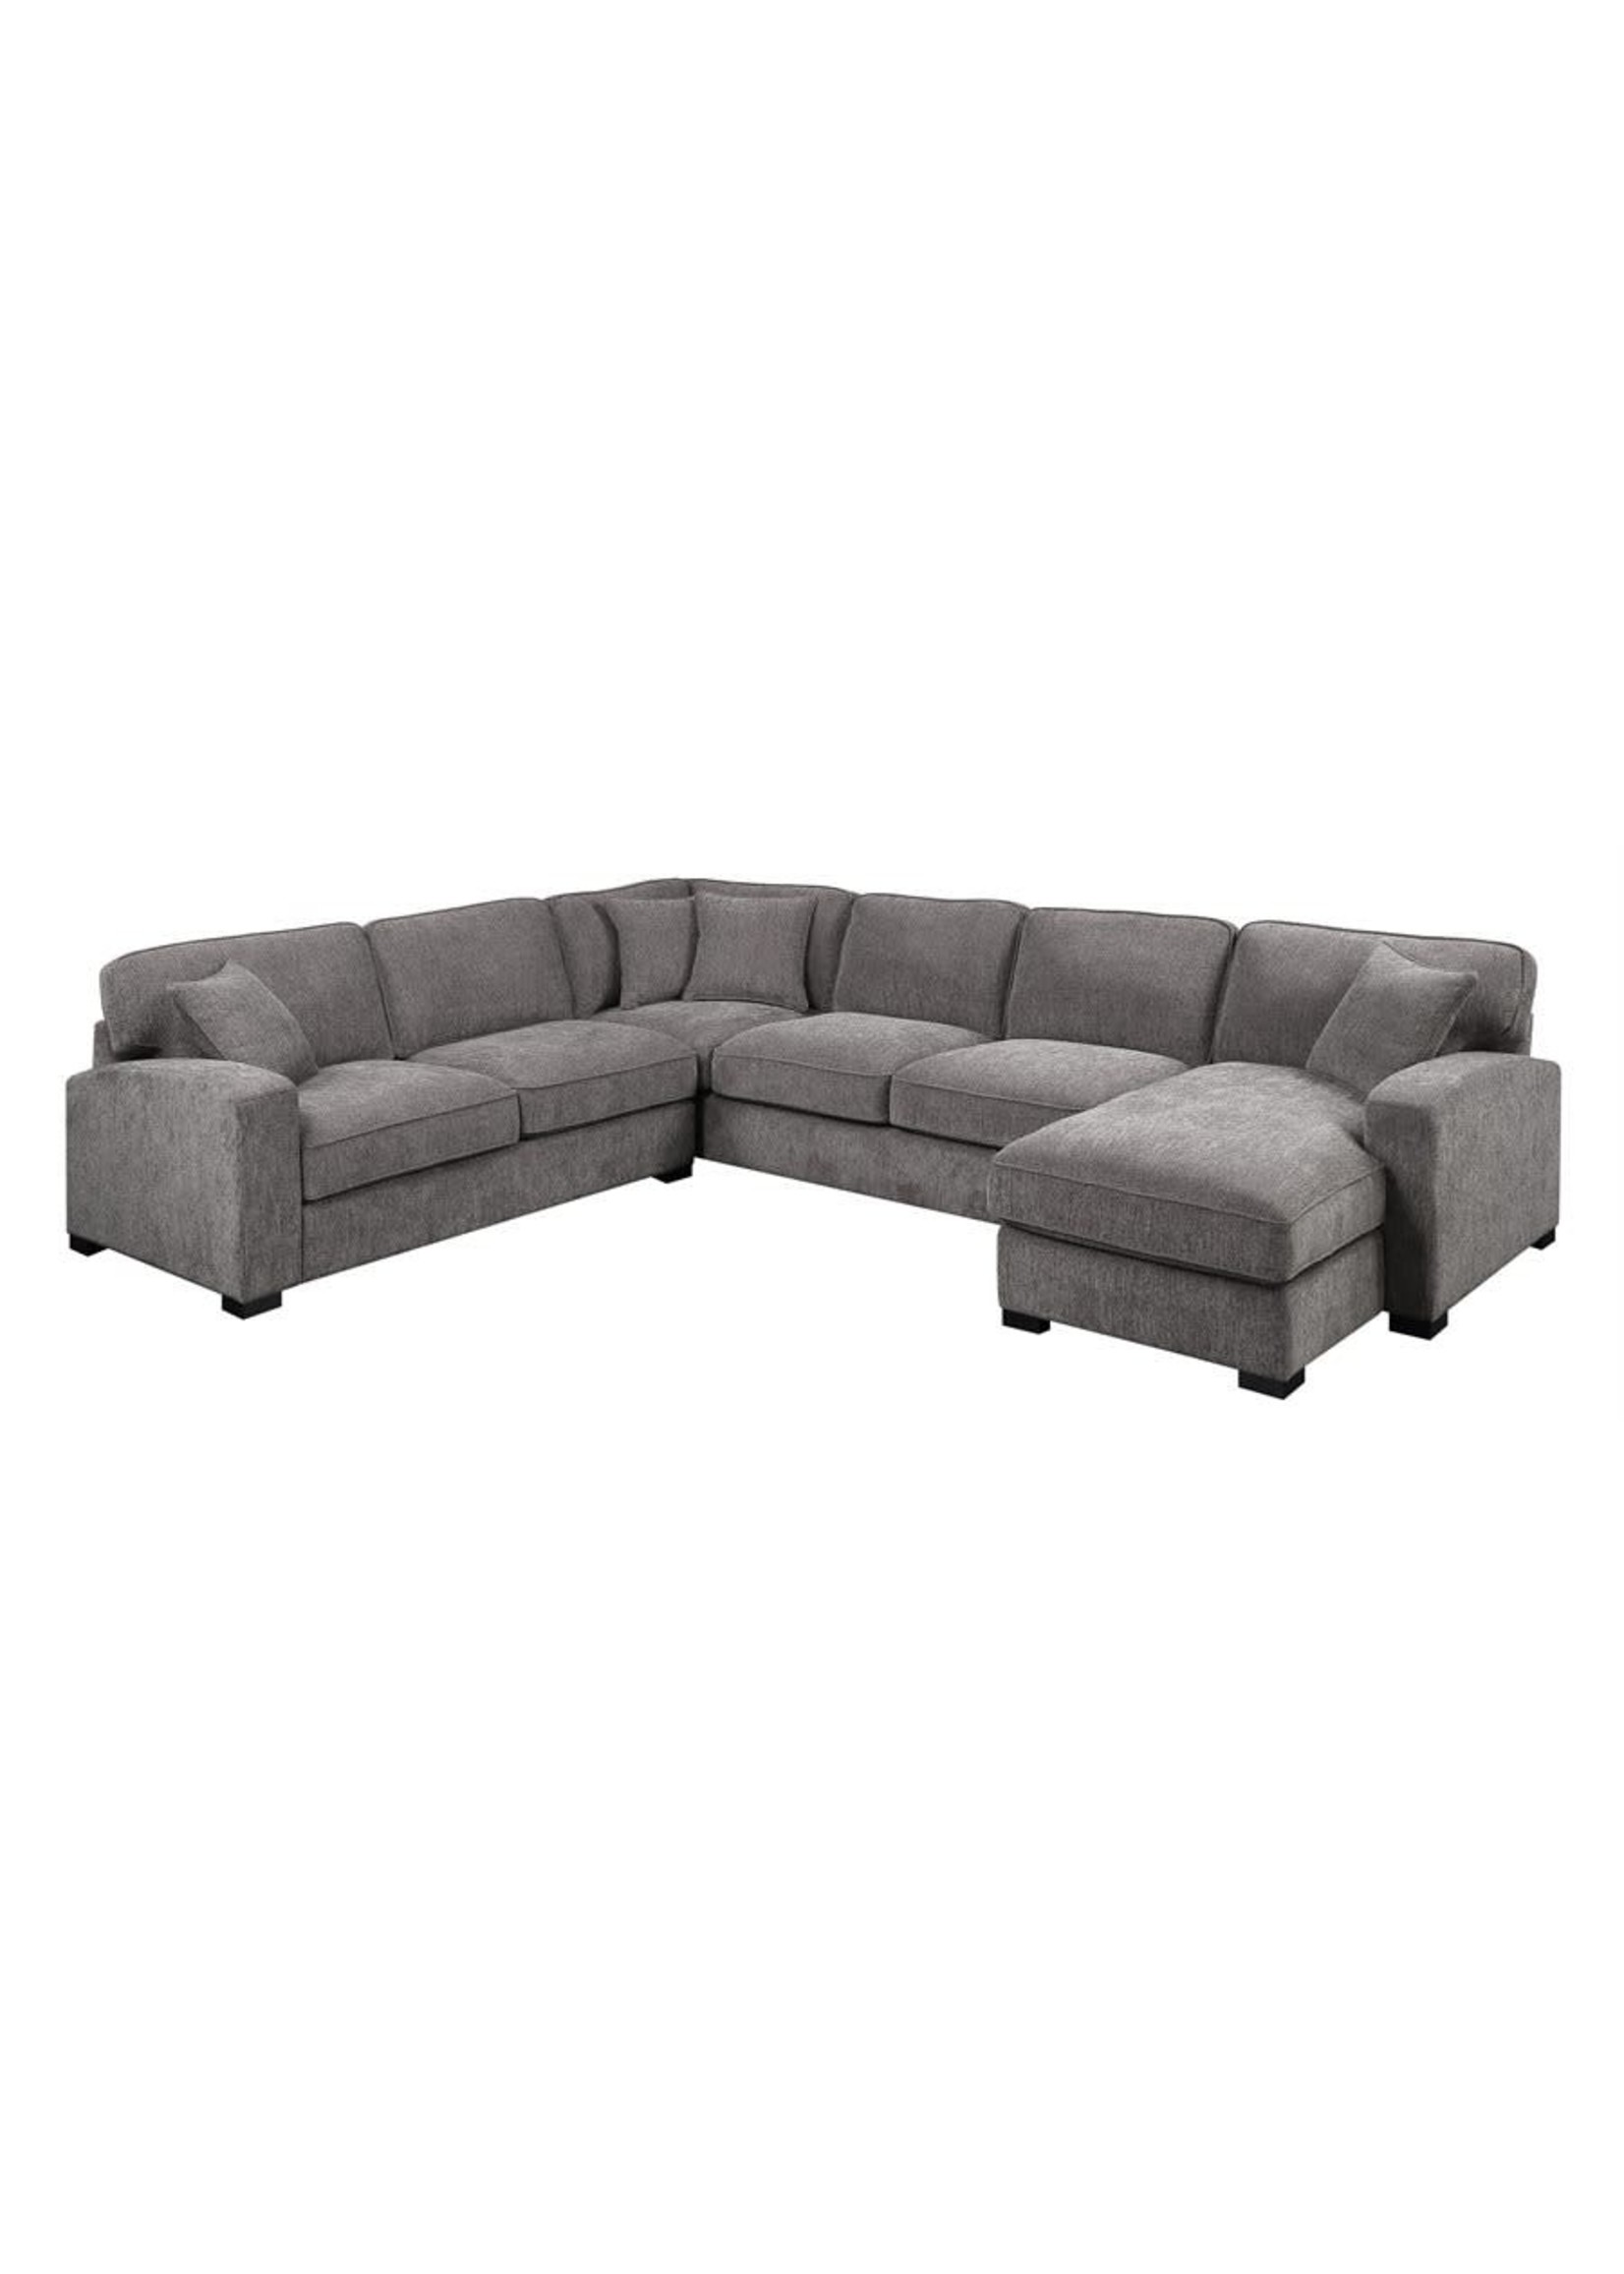 New REPOSE-3PC SECTIONAL-W / 4 PILLOWS-DARK GREY  U4174-11-31-12-03A-K EH